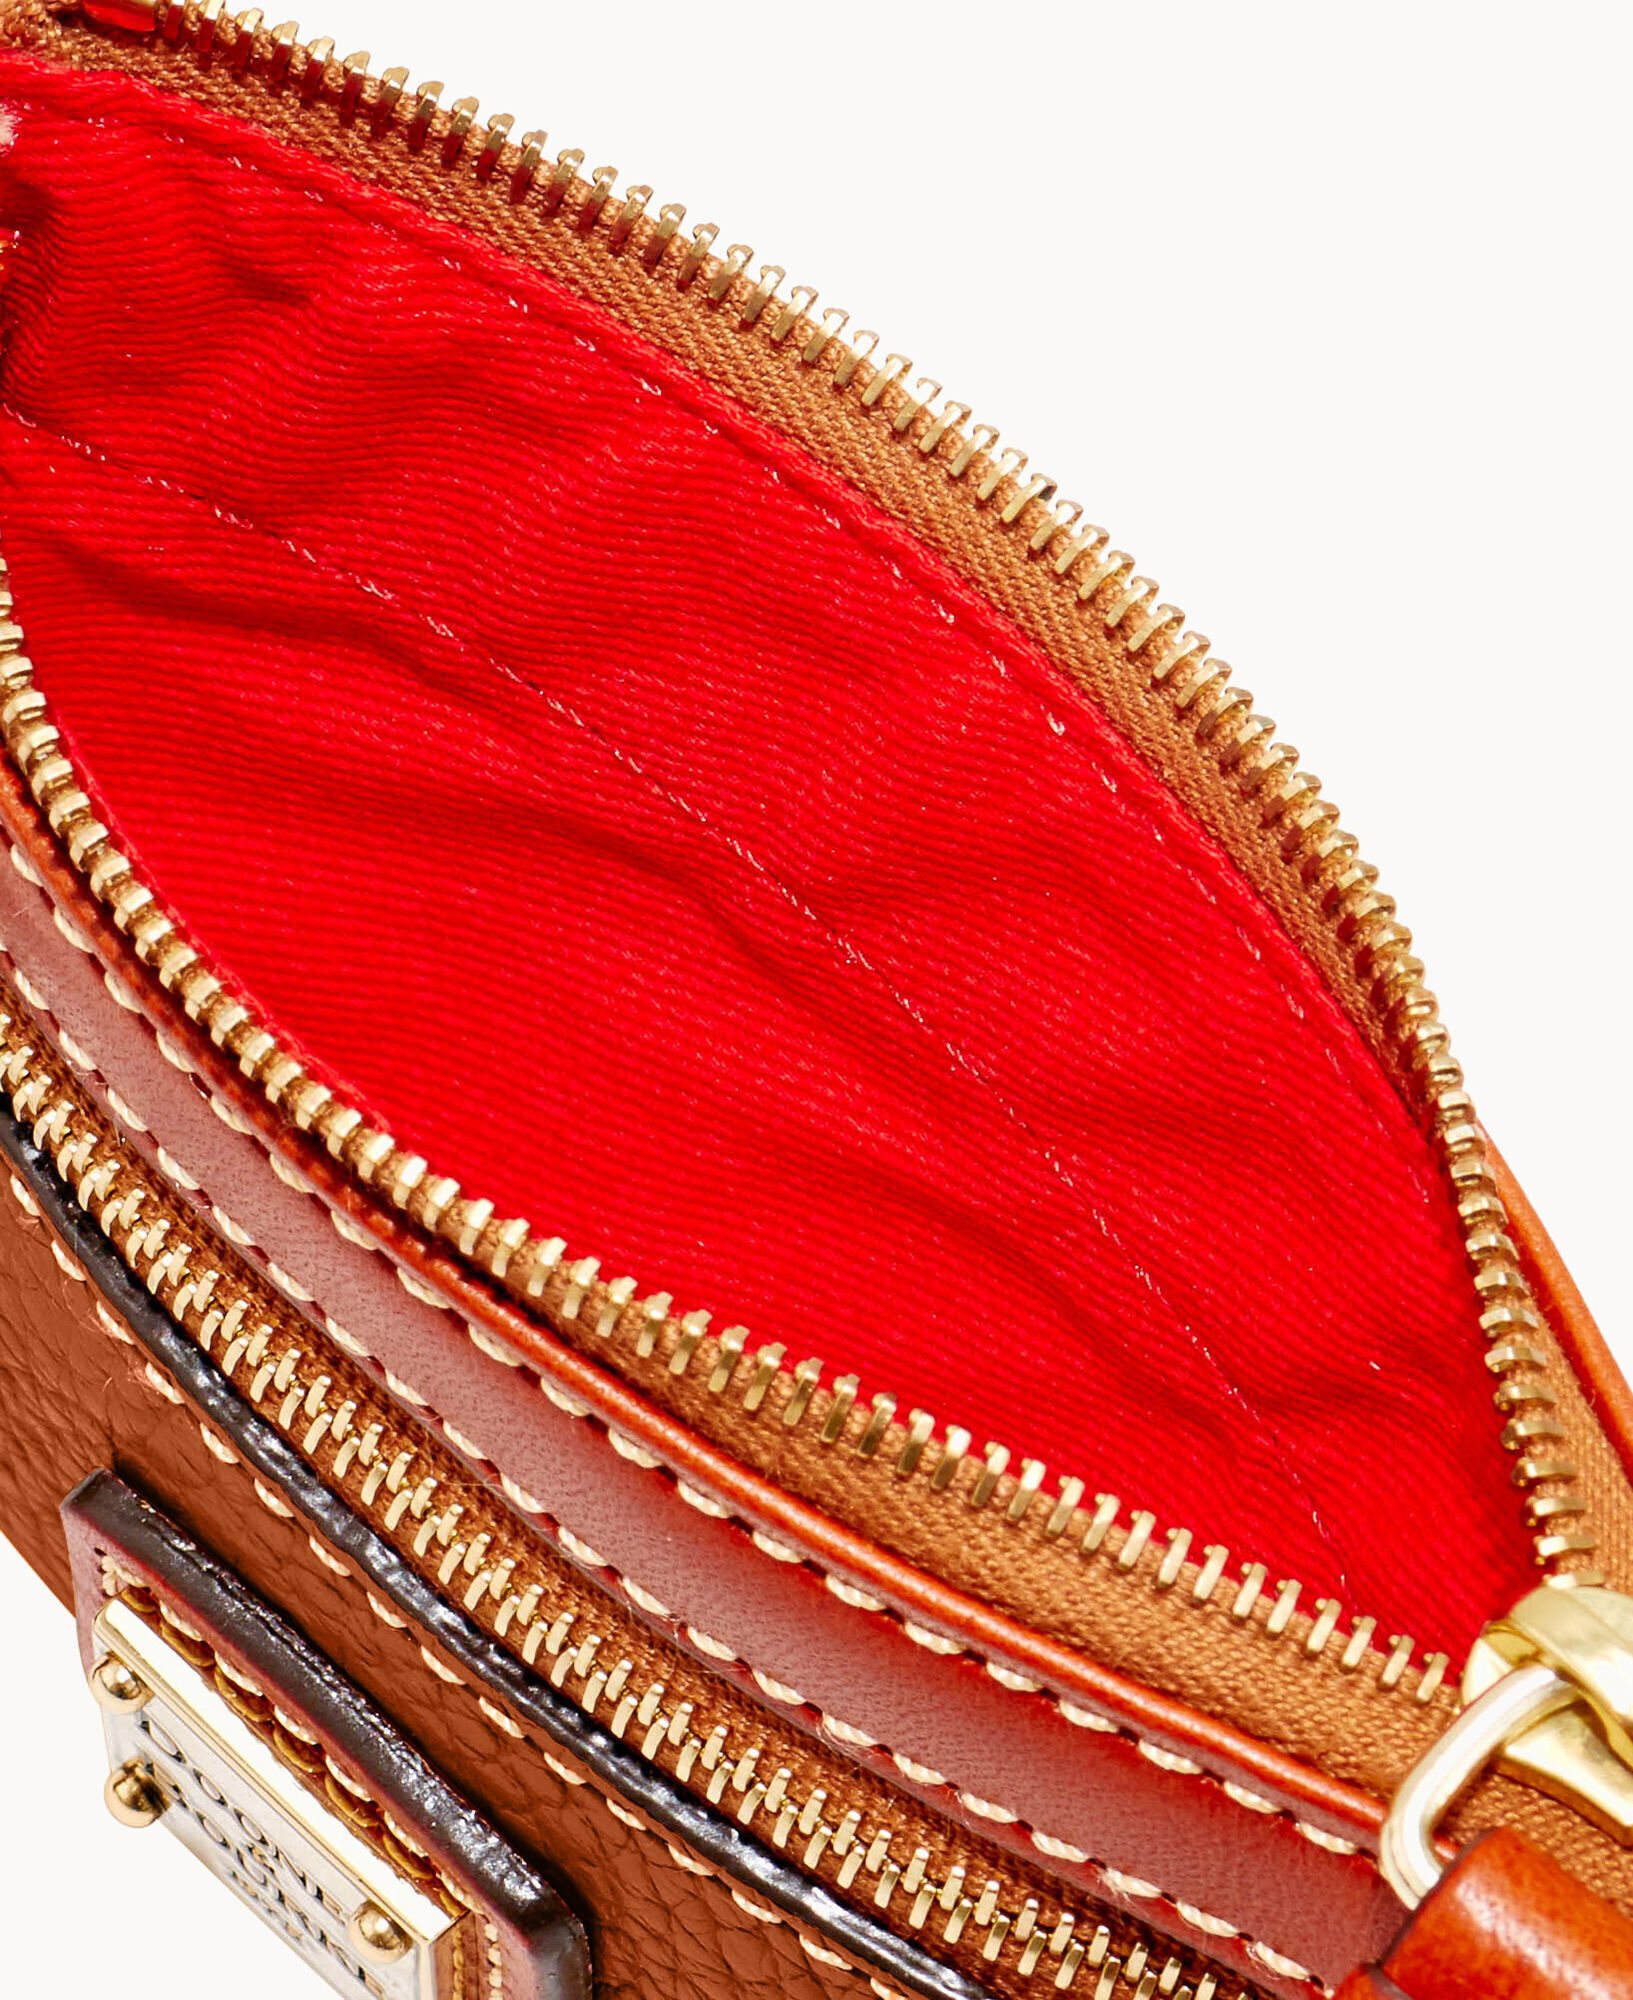 Leather Coin Cases & Coin Purses